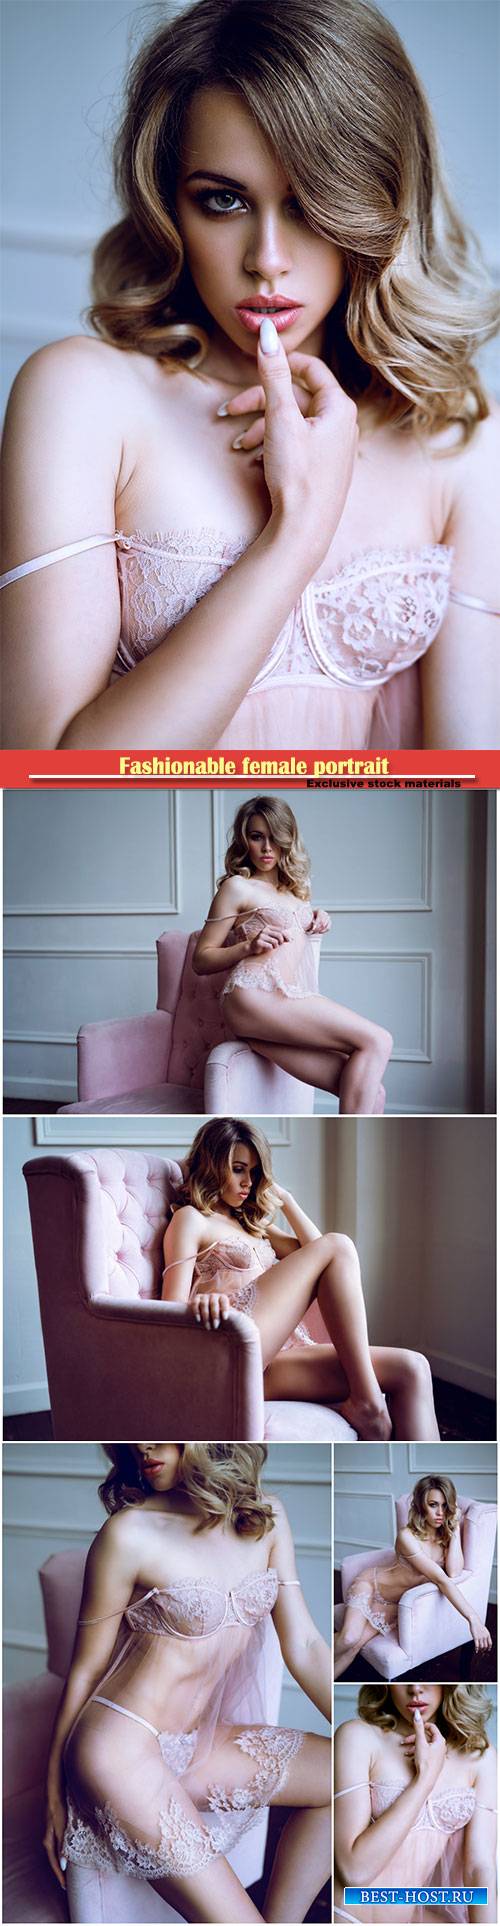 Fashionable female portrait of cute lady in pink robe and panties